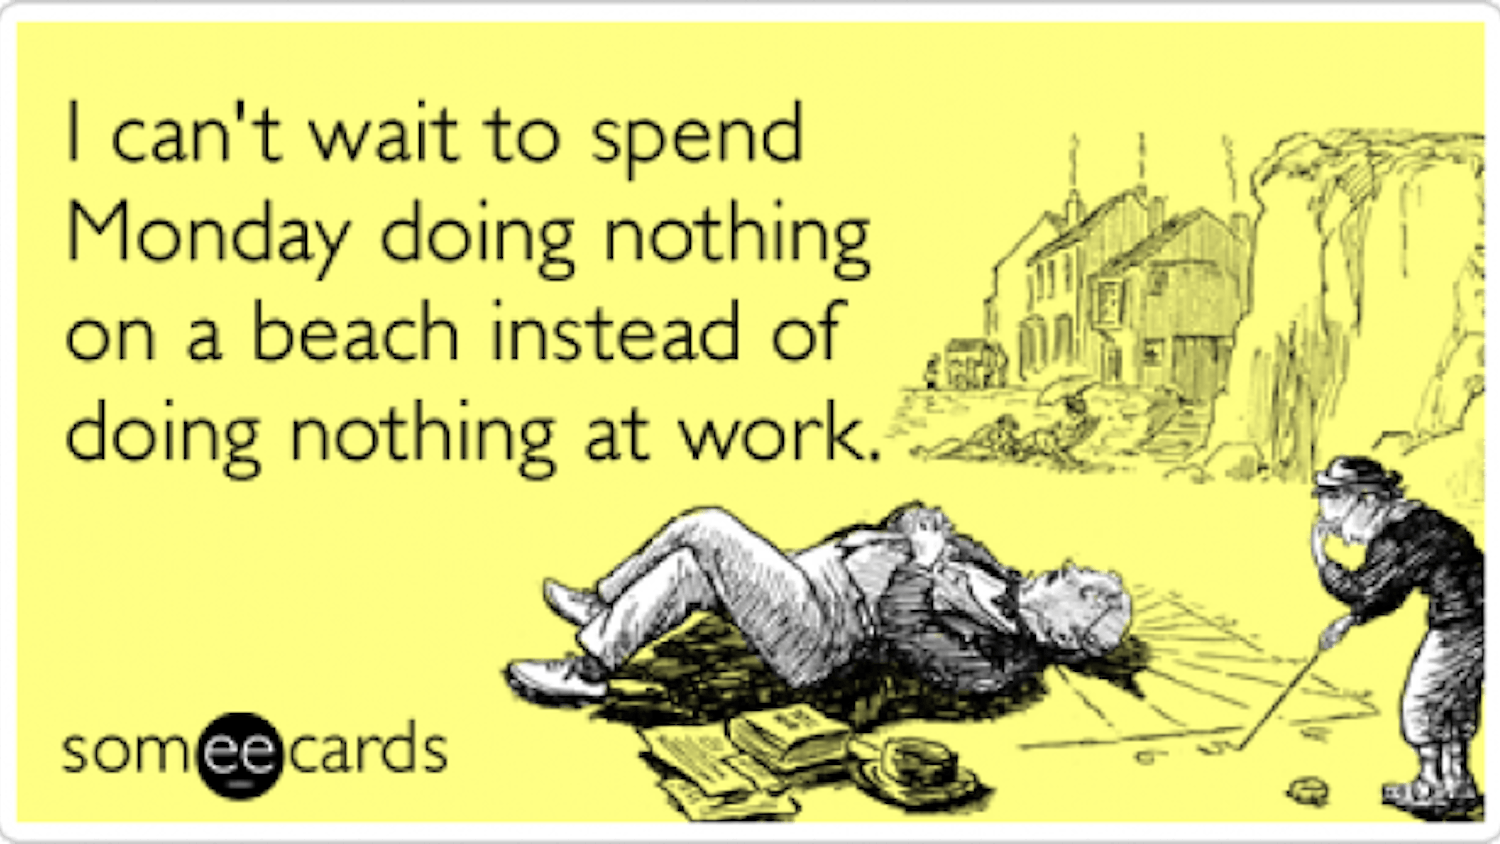 monday-holiday-work-relax-memorial-day-ecards-someecards-e1337955616535